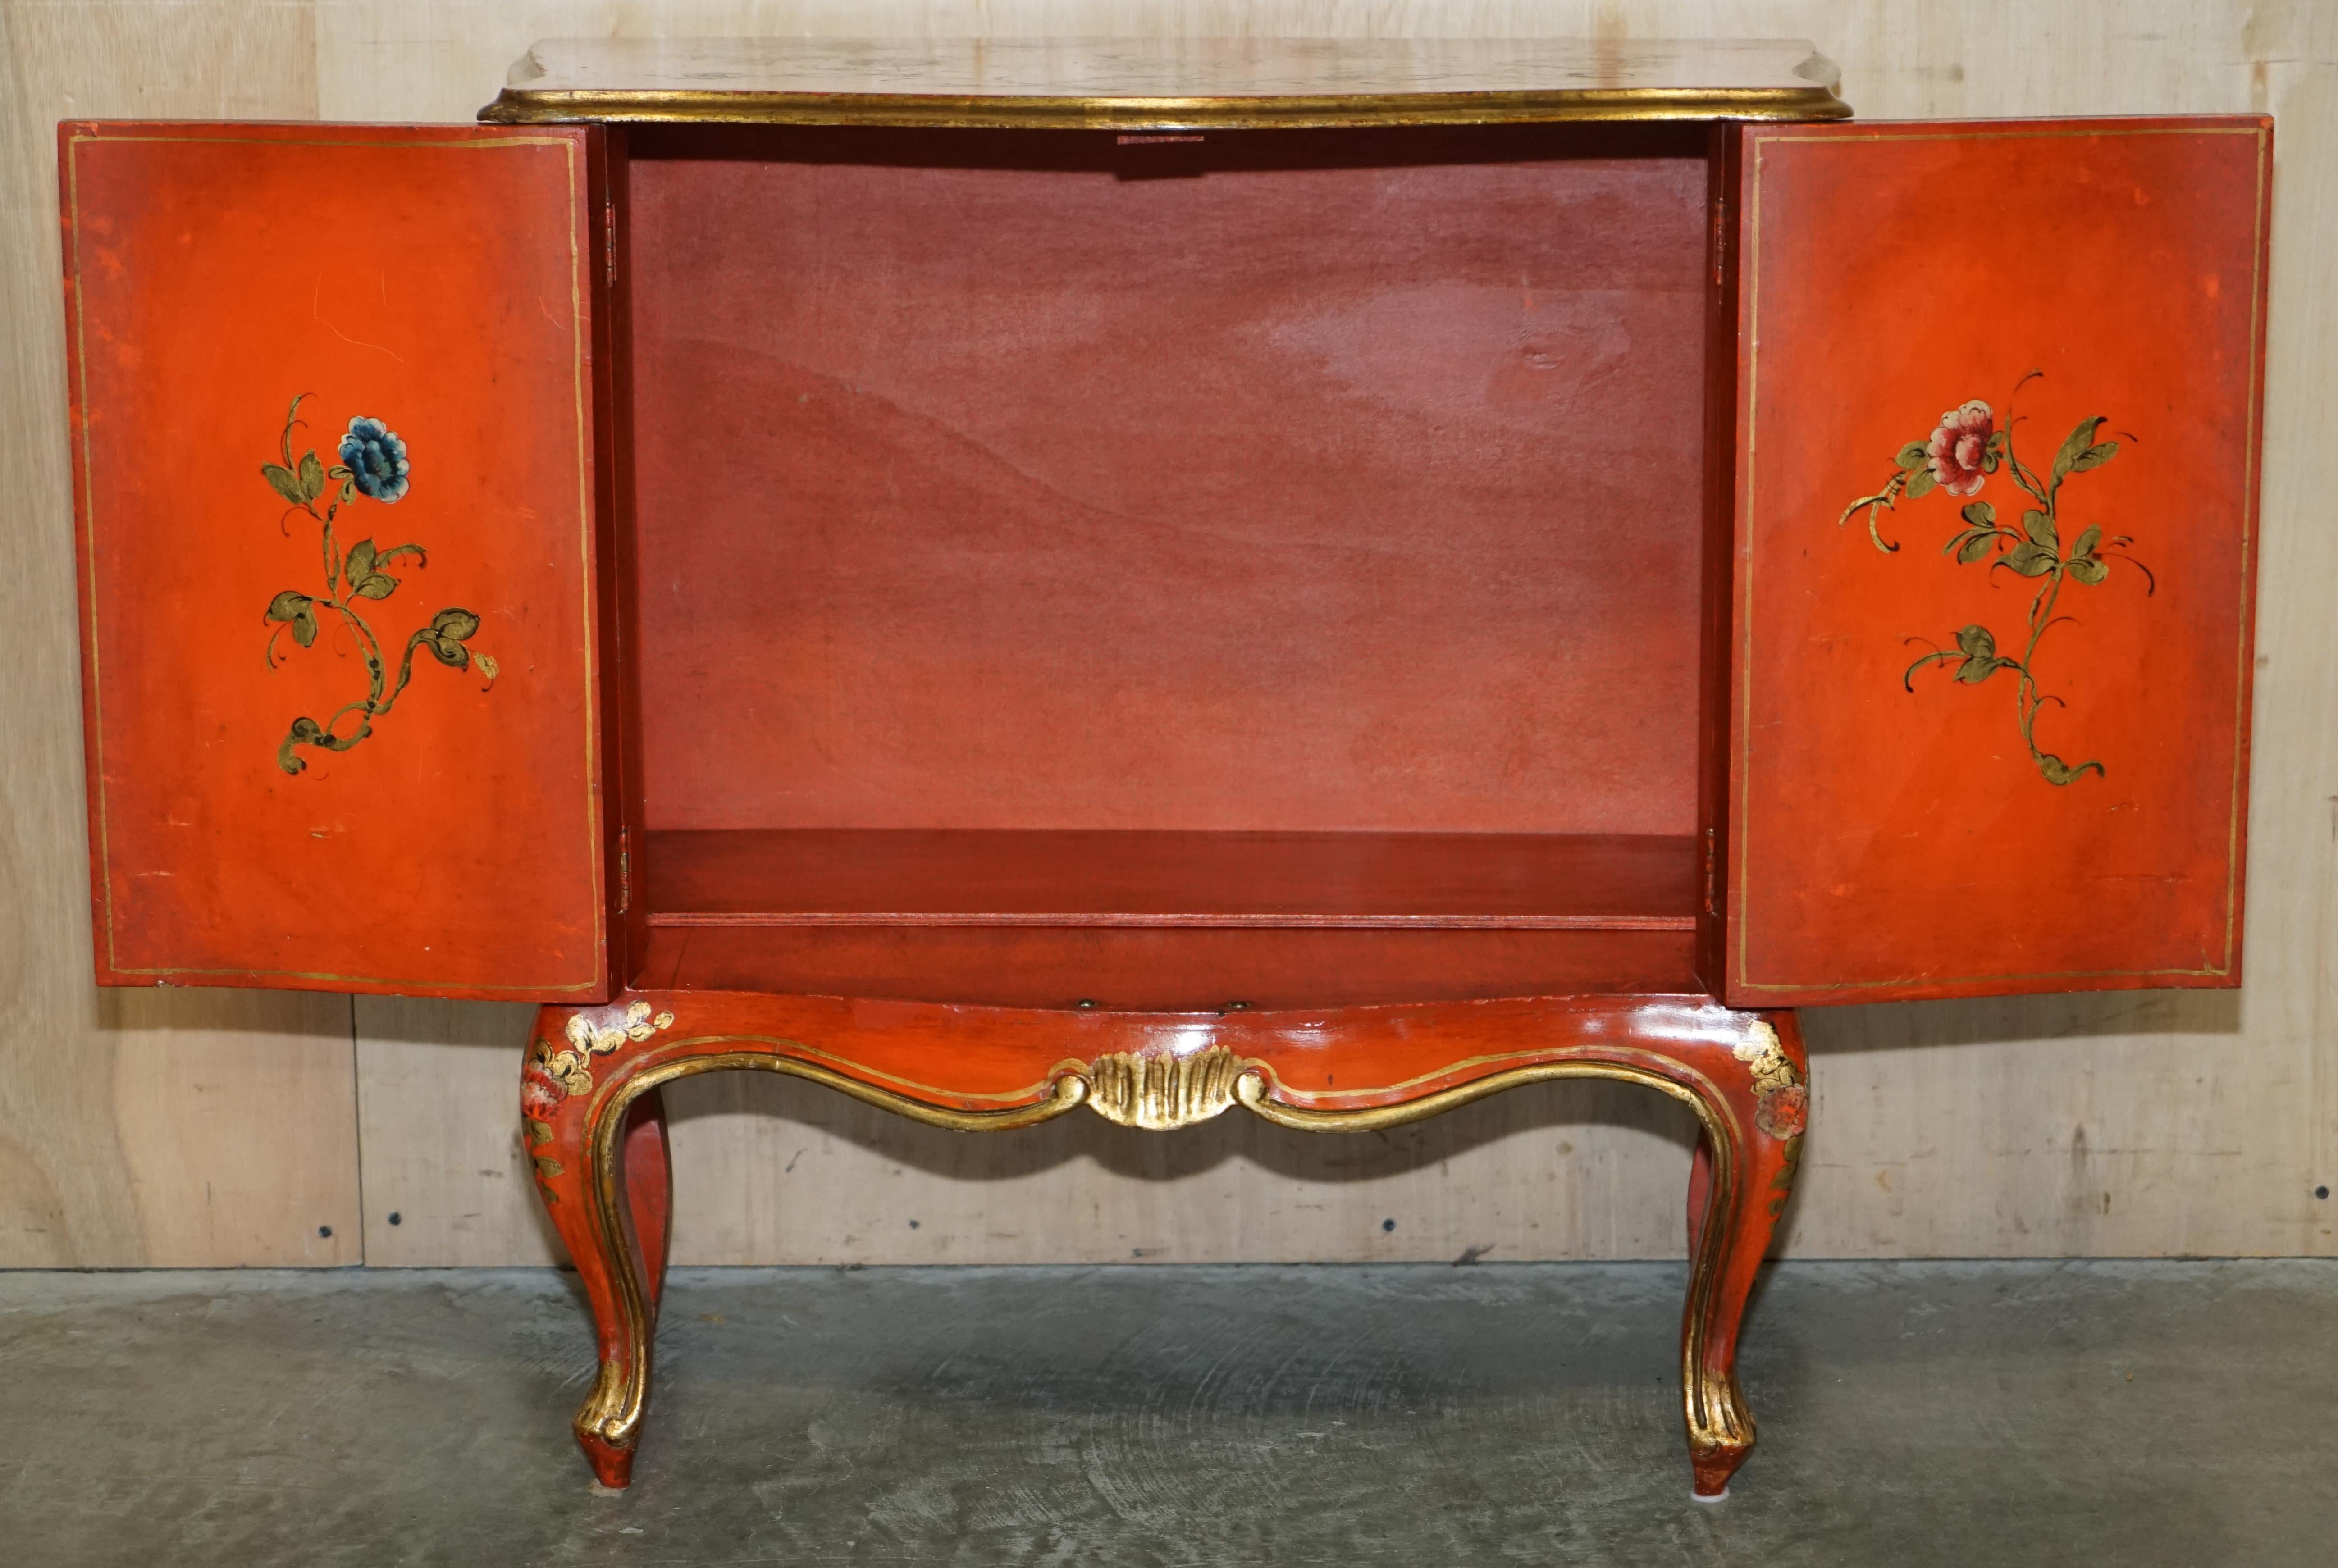 STUNNING 1920's VINTAGE CHINESE CHINOISERIE GEISHA GIRLS LACQUER SIDE CABINET For Sale 12